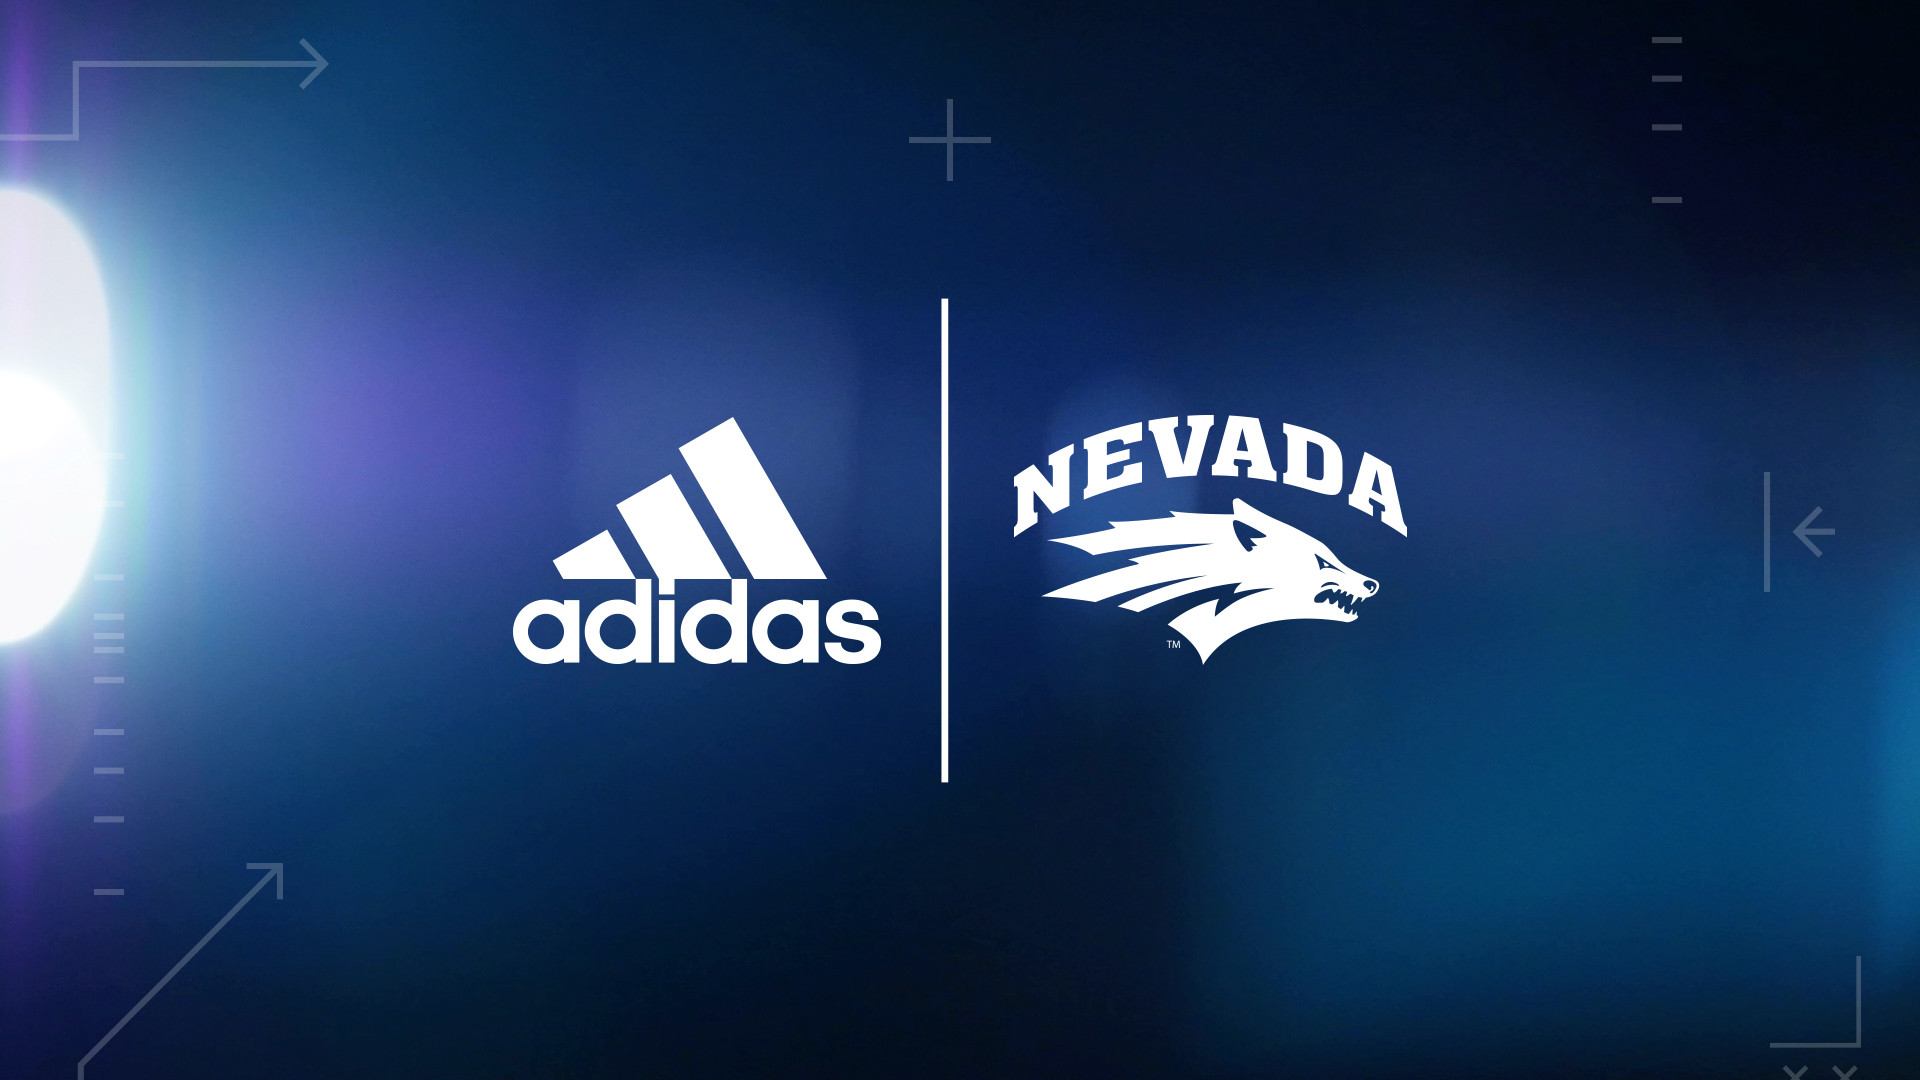 1920x1080 Nevada and adidas announcement